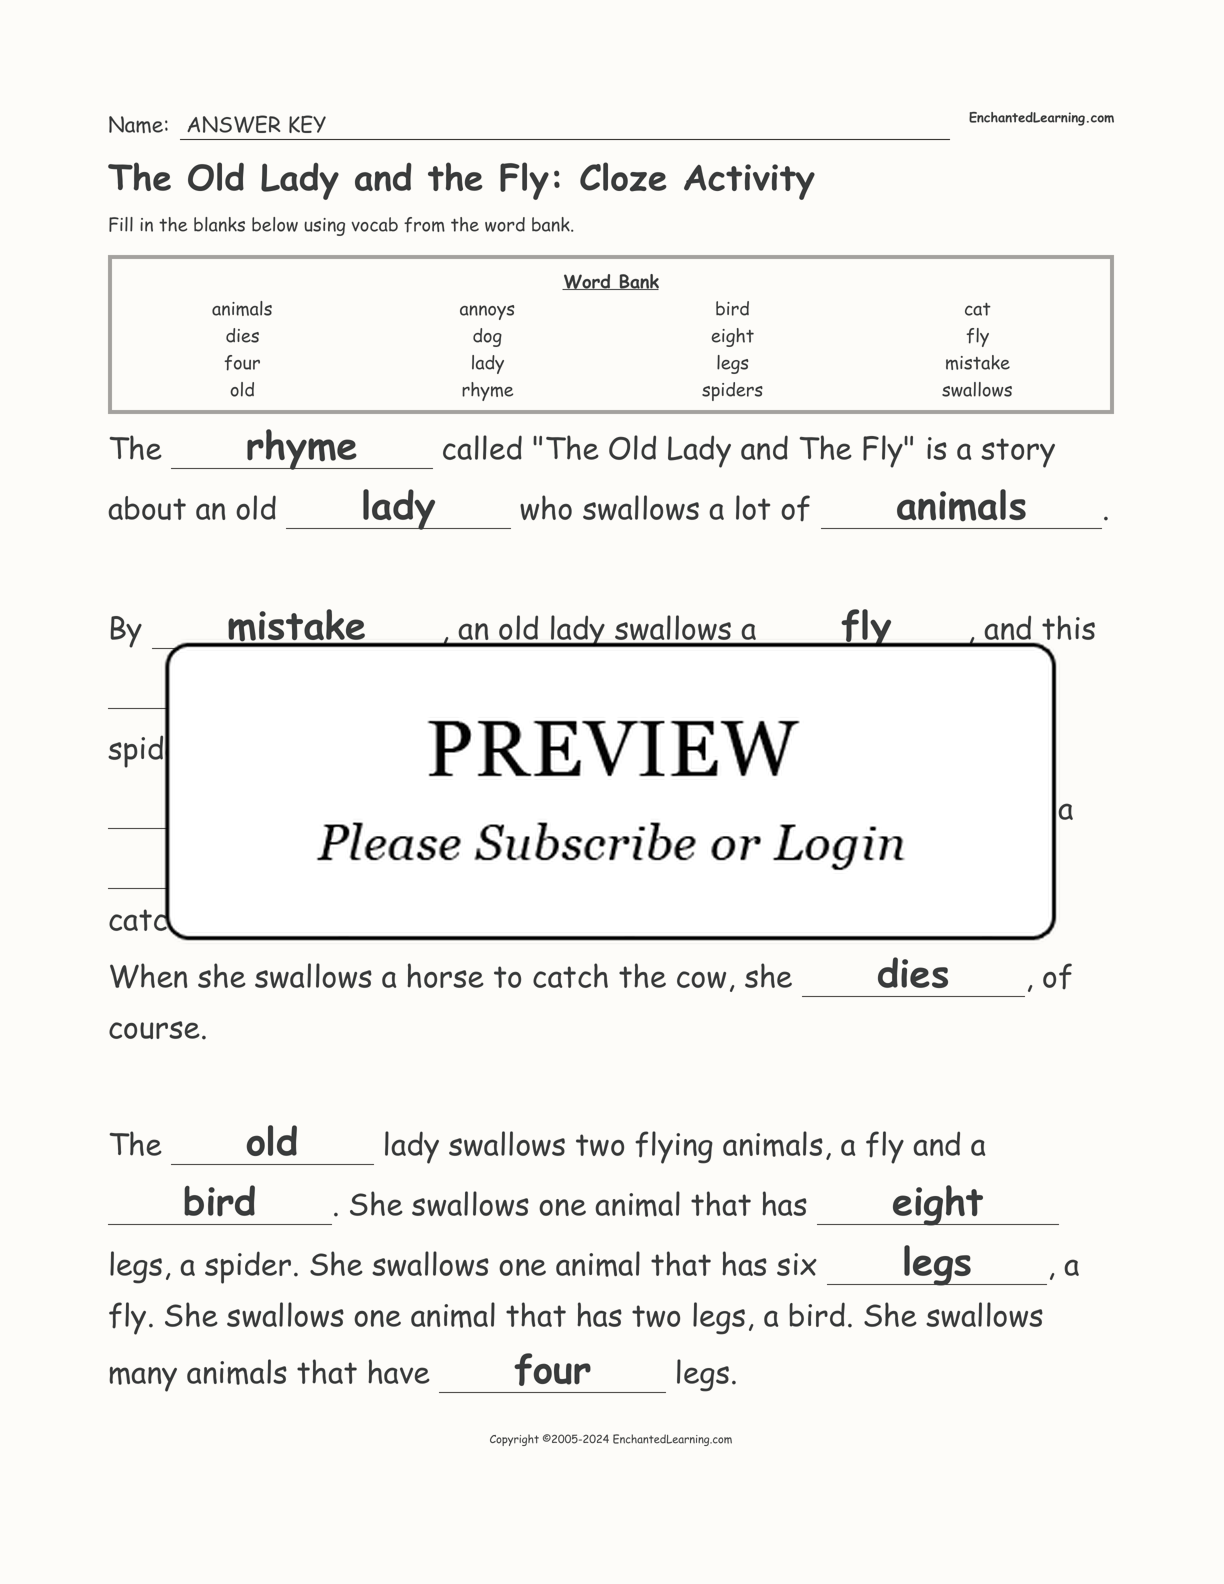 The Old Lady and the Fly: Cloze Activity interactive worksheet page 2